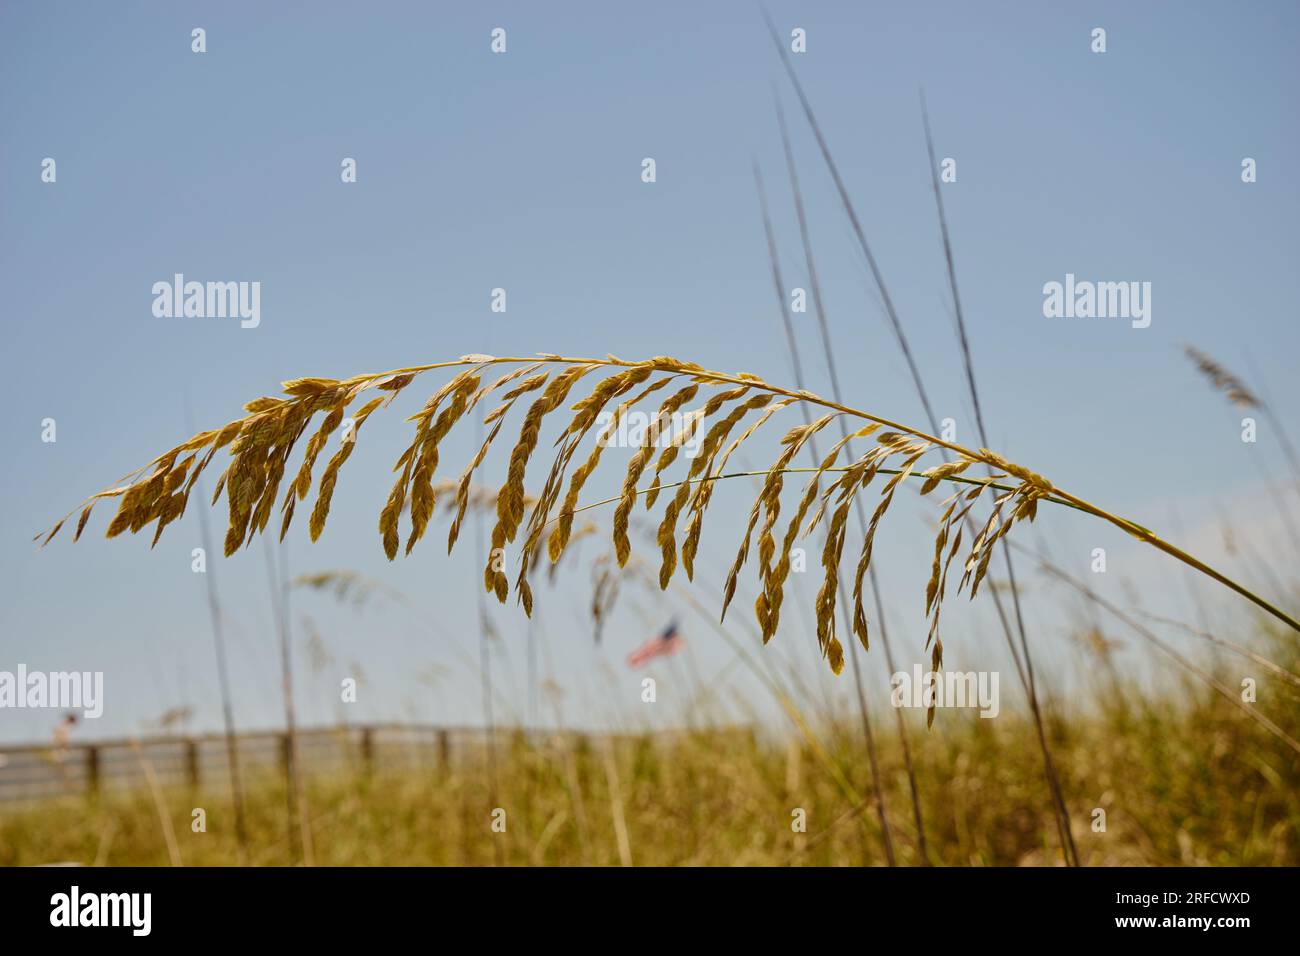 This is a photo realistic image of a single stalk of sea oats in the foreground with a blue sky and a beach in the background. Stock Photo